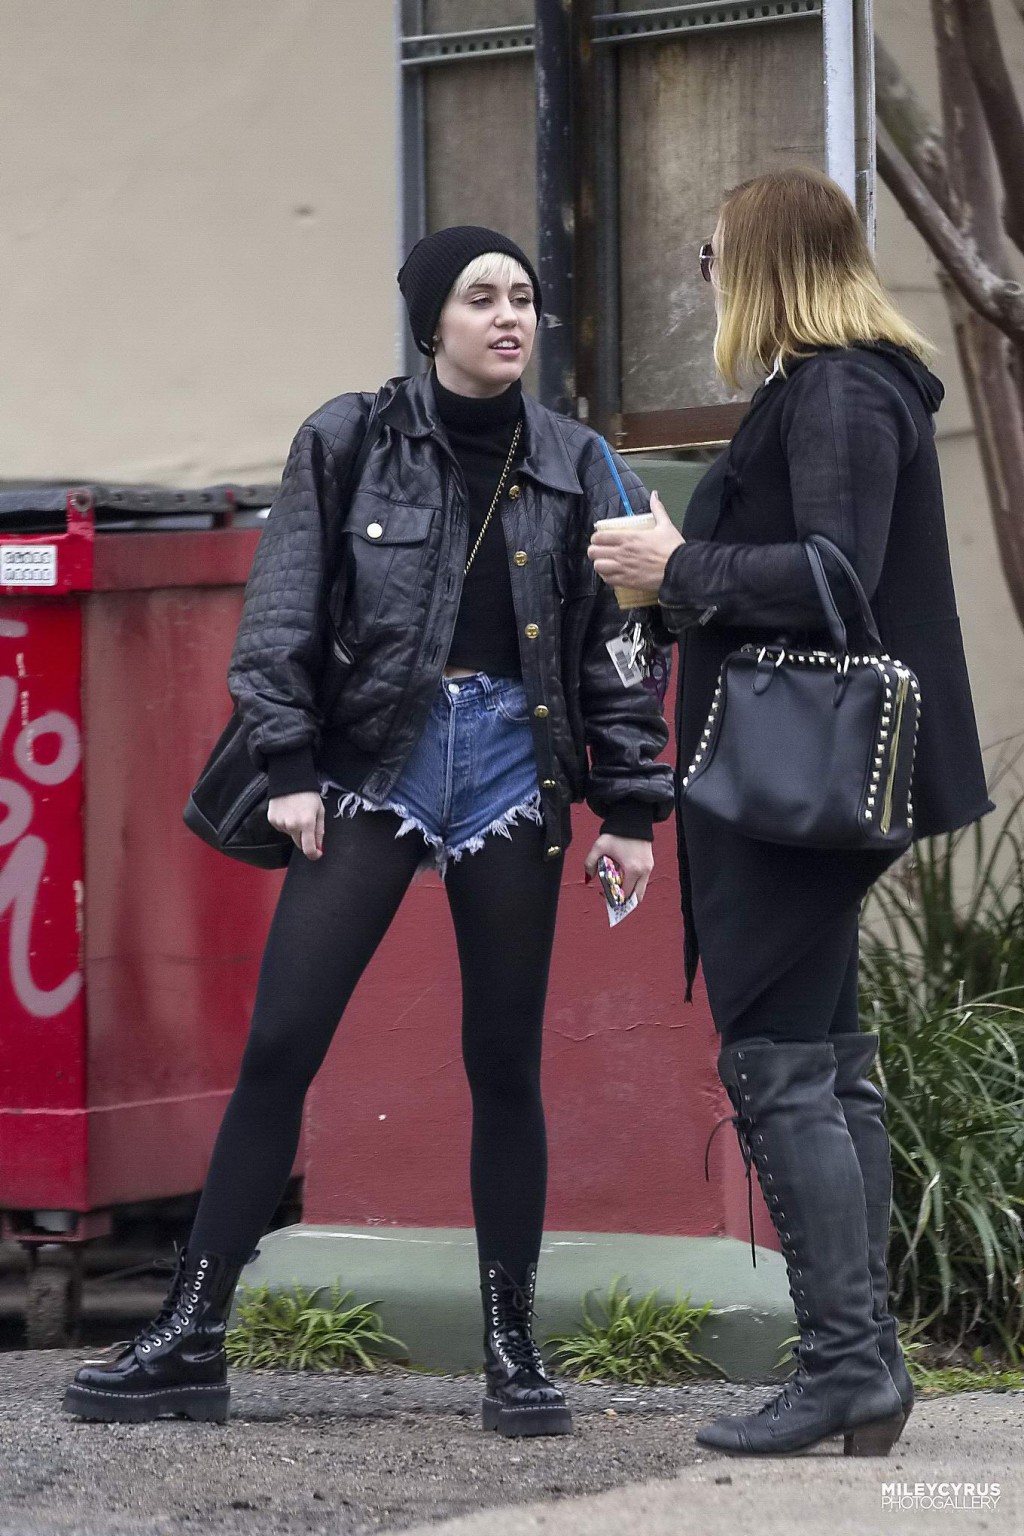 Miley Cyrus shows off her legs and ass wearing the denim shorts  black pantyhose #75201760